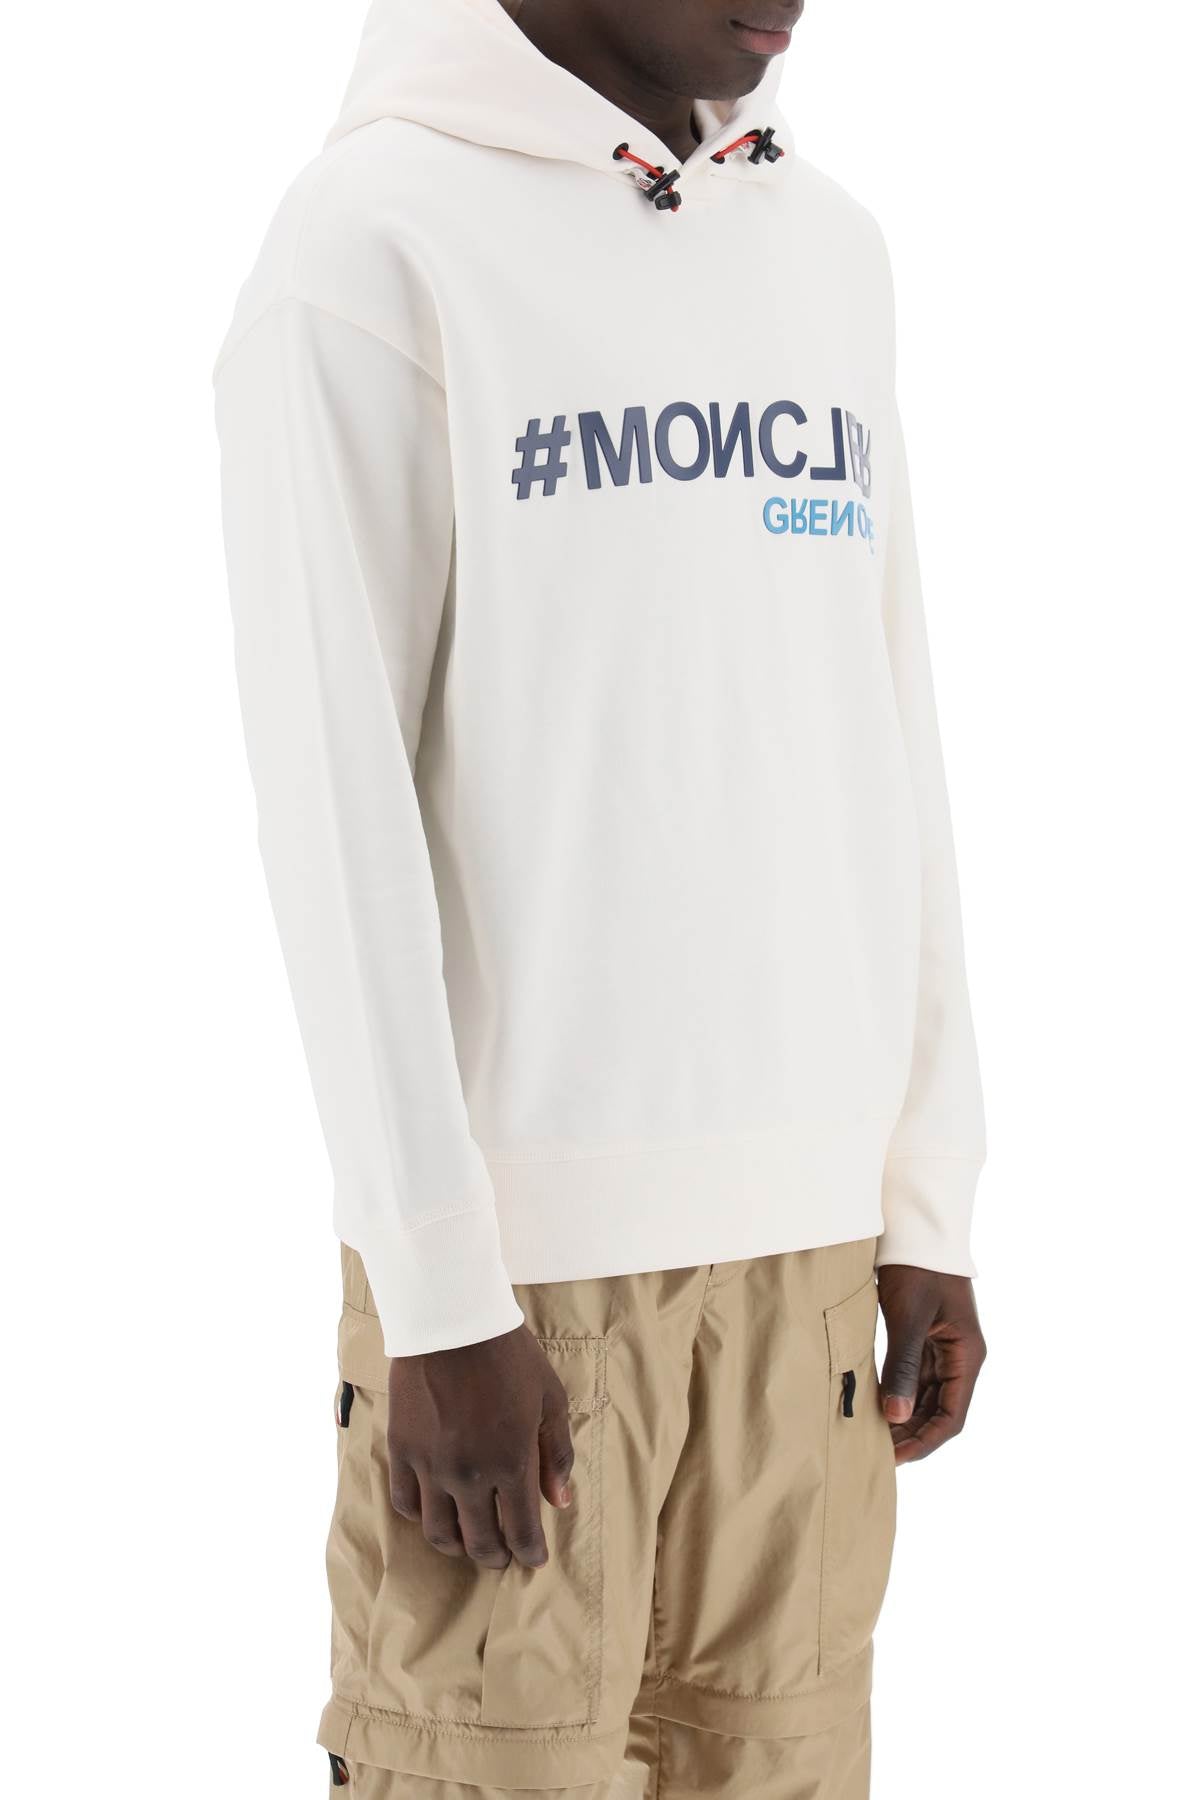 Moncler GRENOBLE Moncler grenoble hooded sweatshirt with